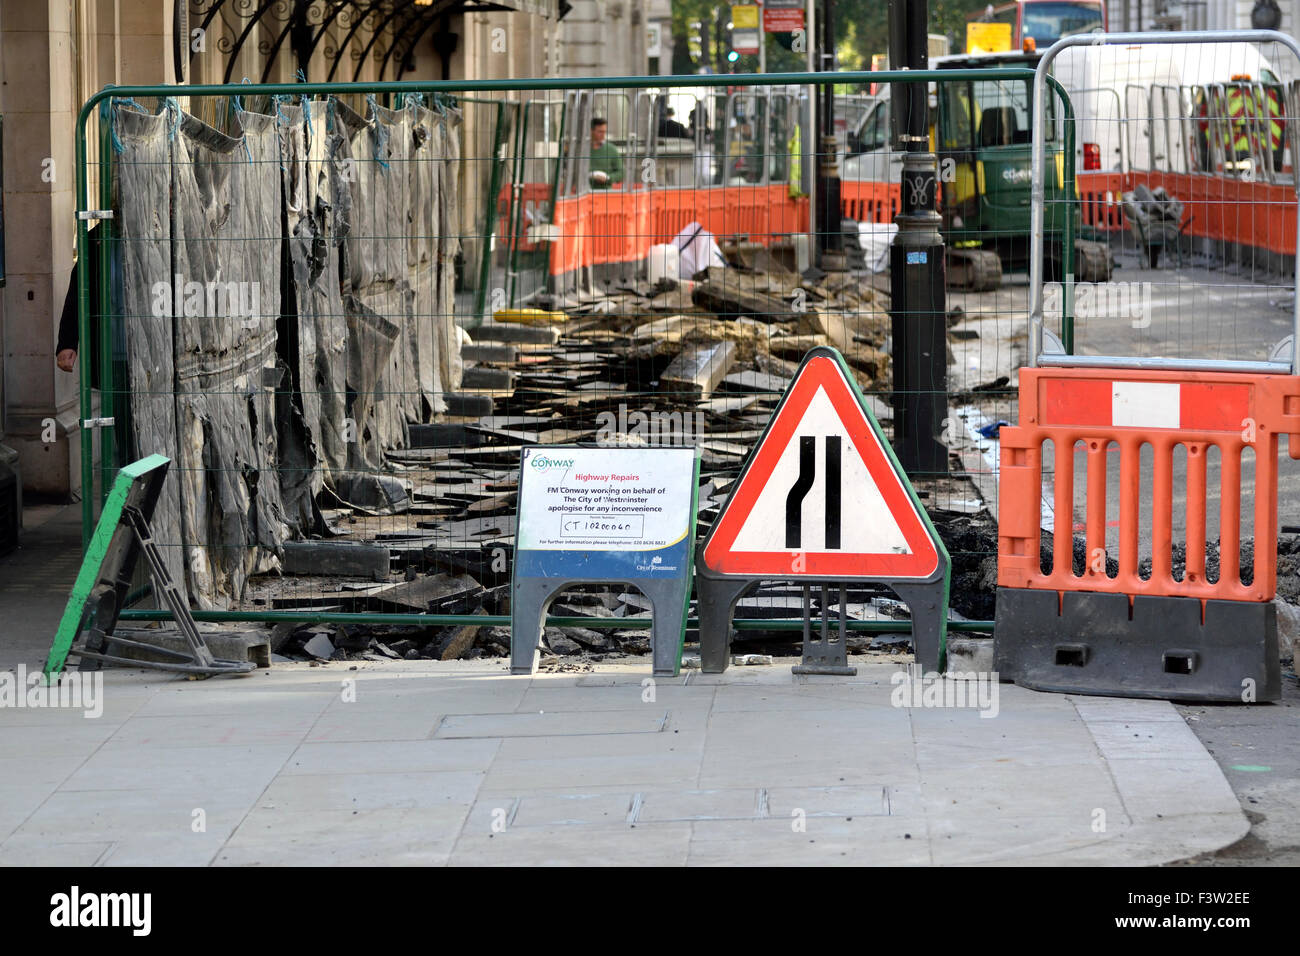 London, England, UK. Roadworks in central London - disruption caused to pedestrians by repairs to the pavement Stock Photo